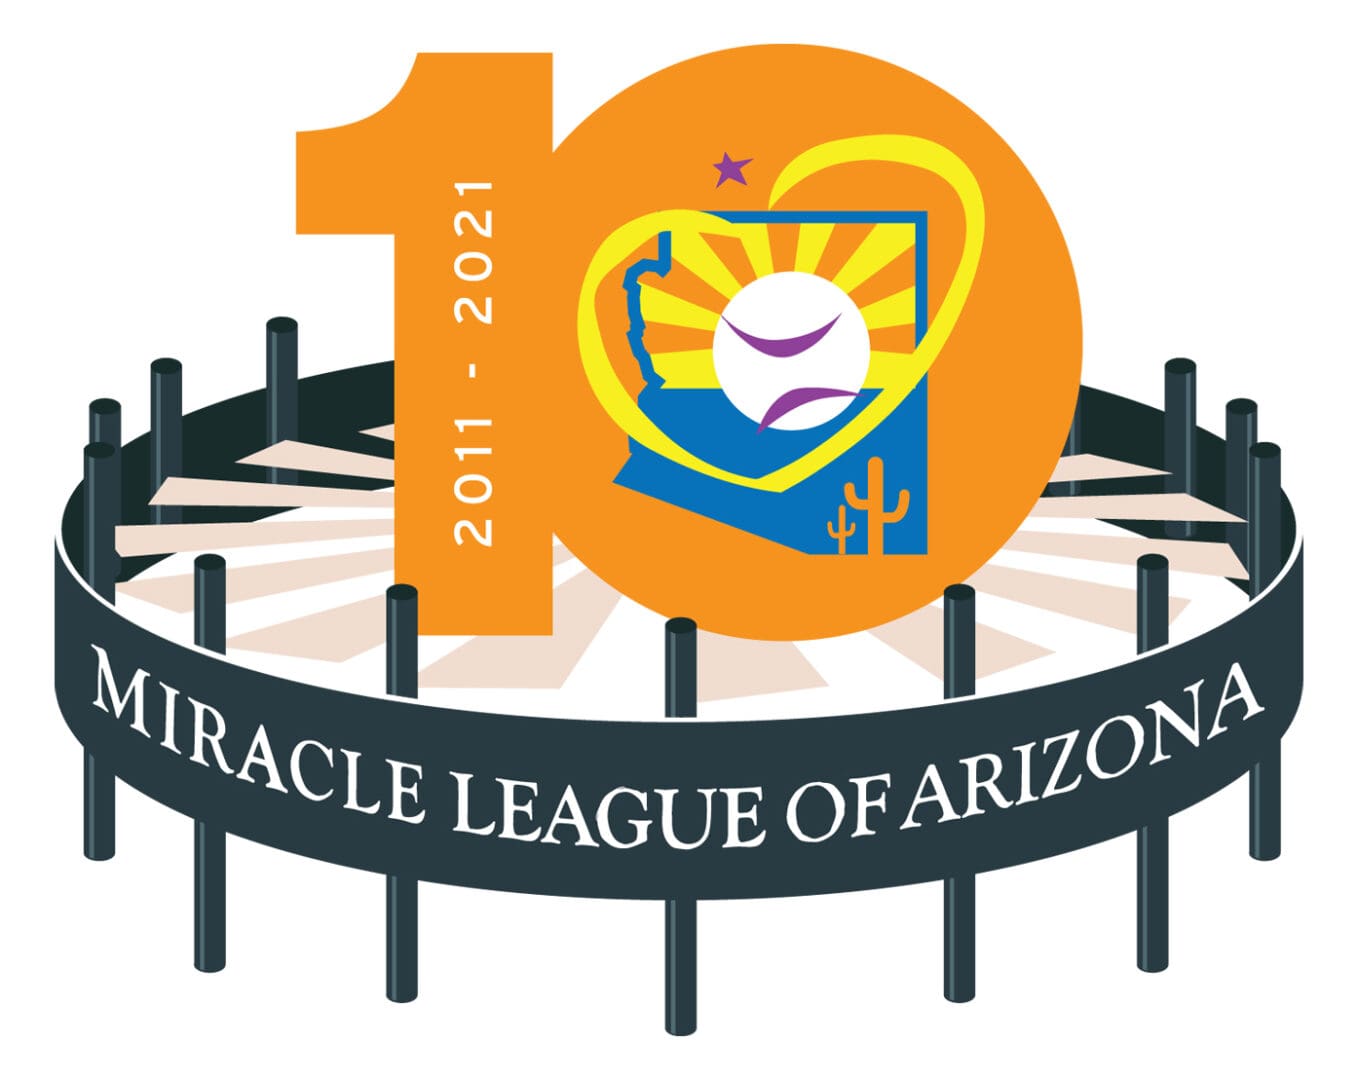 A logo for the miracle league of arizona.